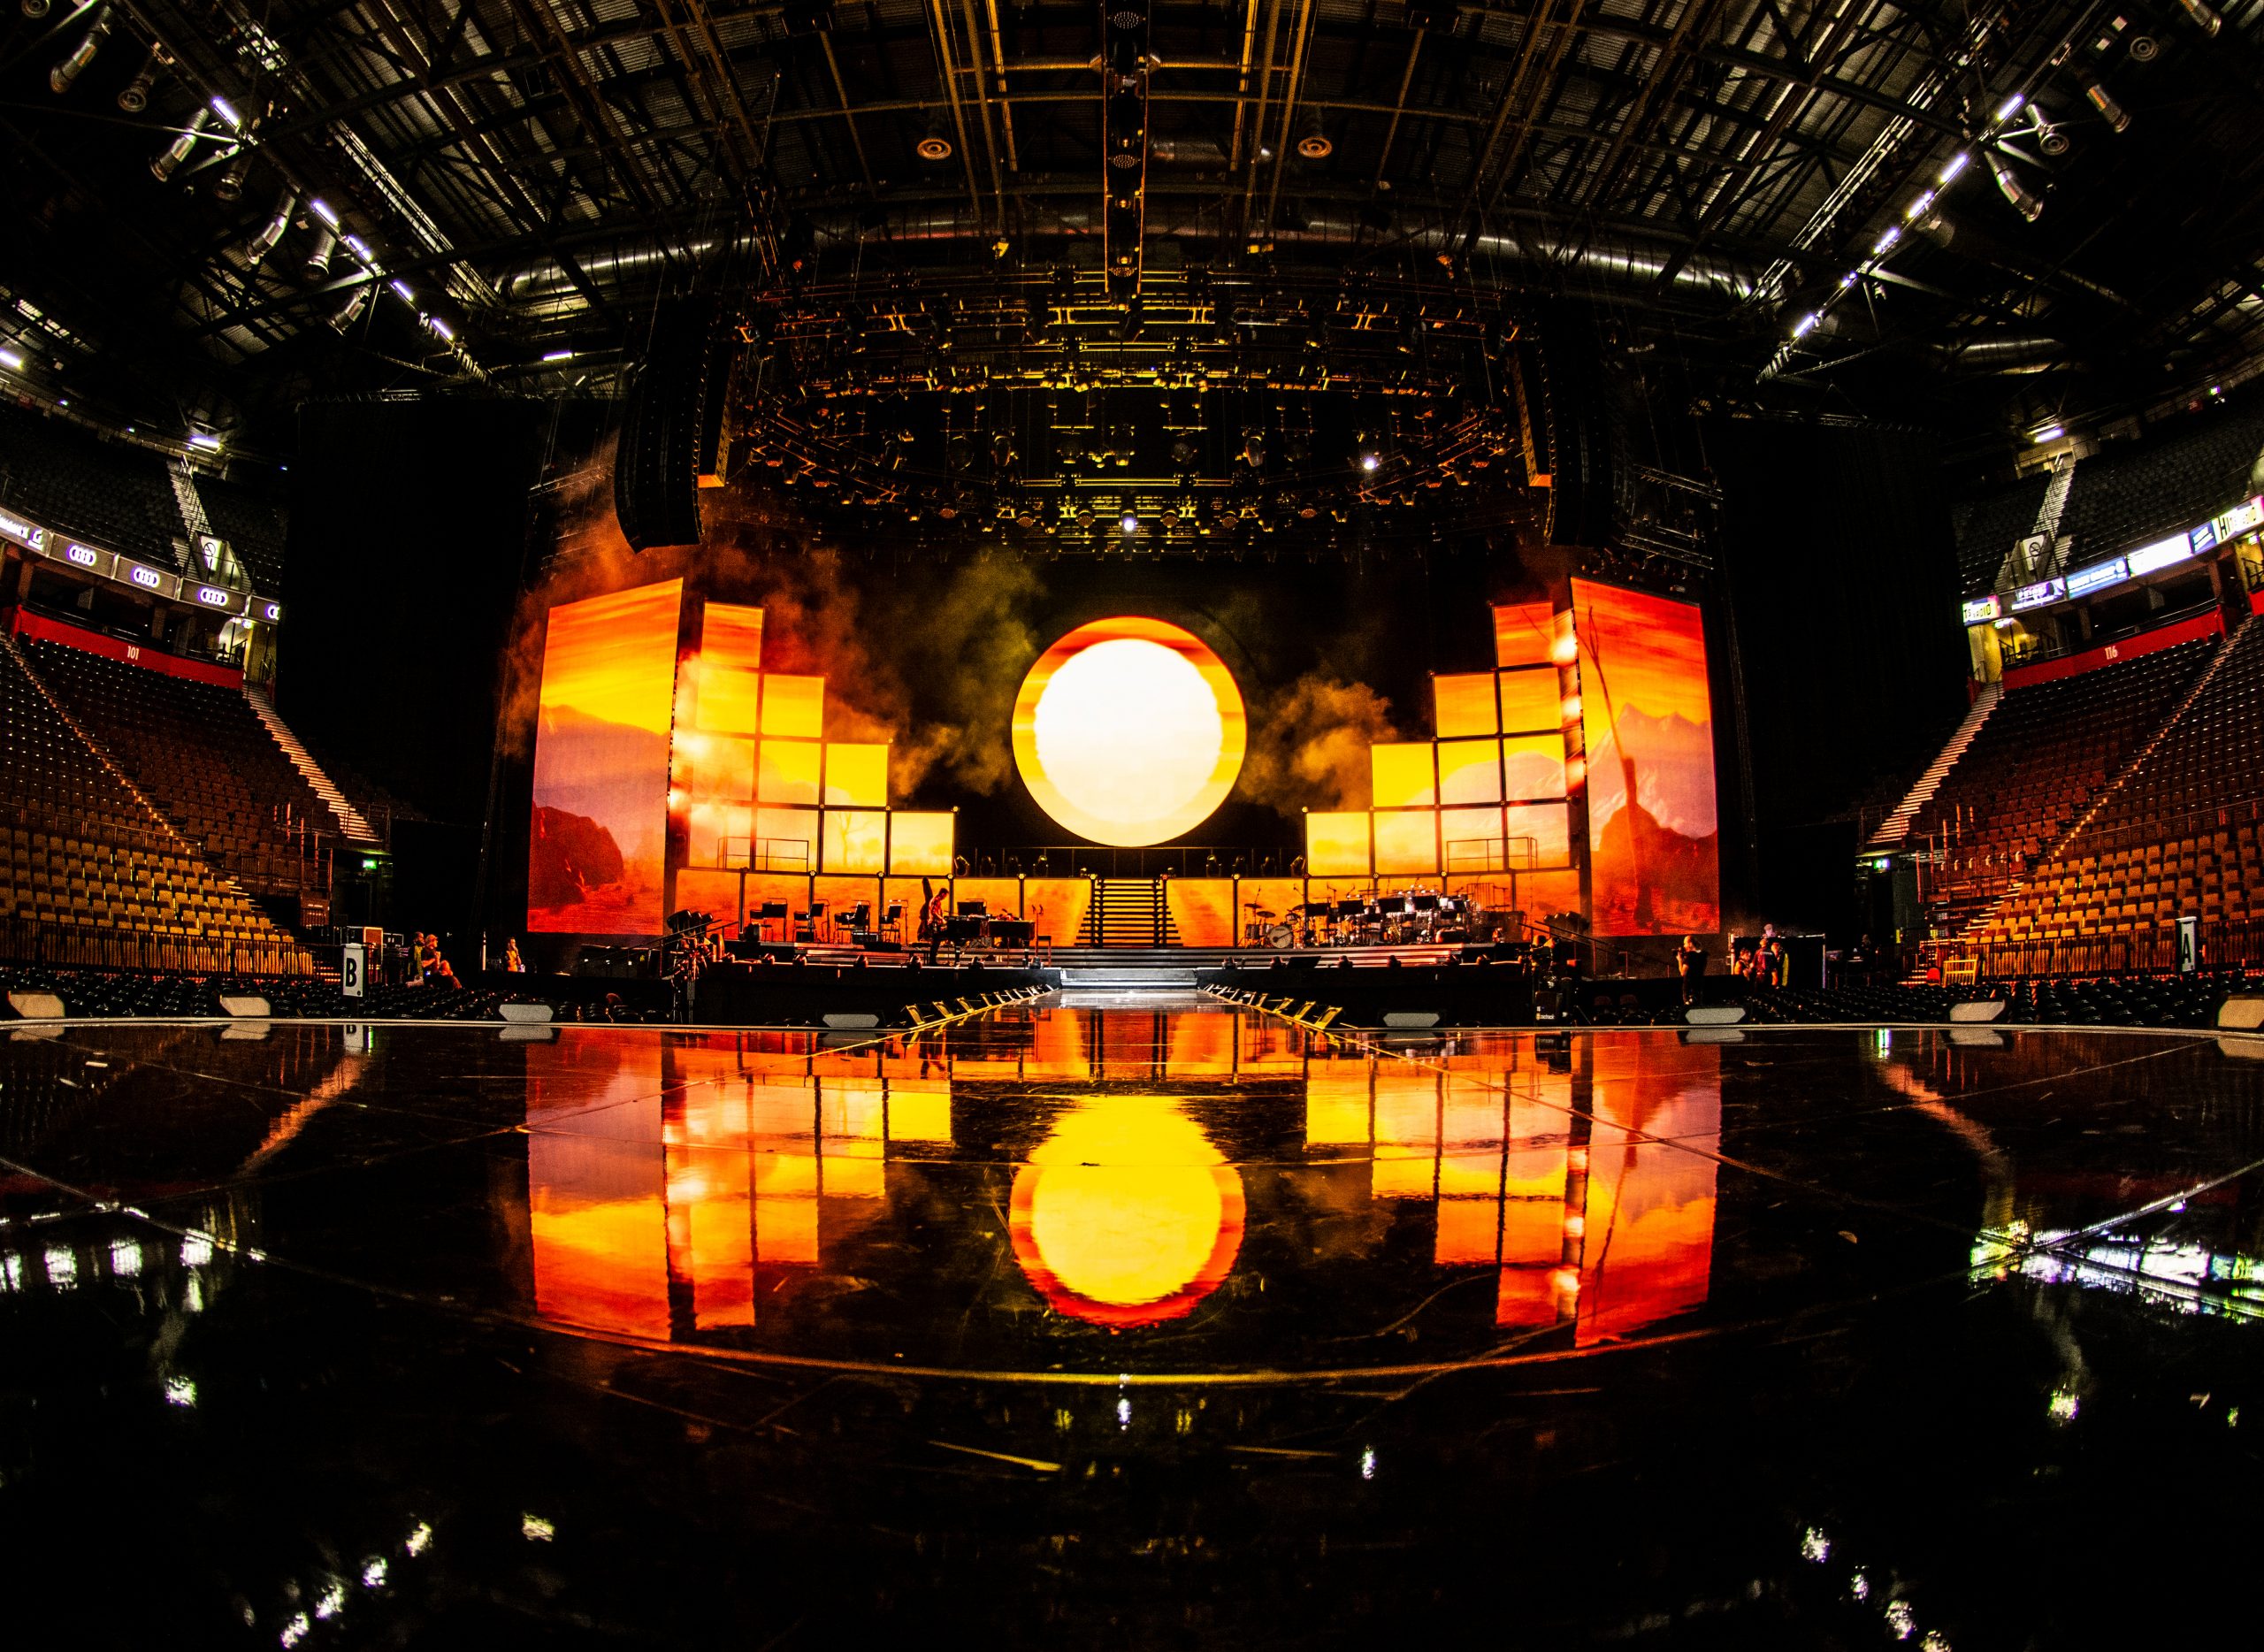 A dark stage with a bright light in the middle resembling the sun and Harlequin mirror effect flooring.